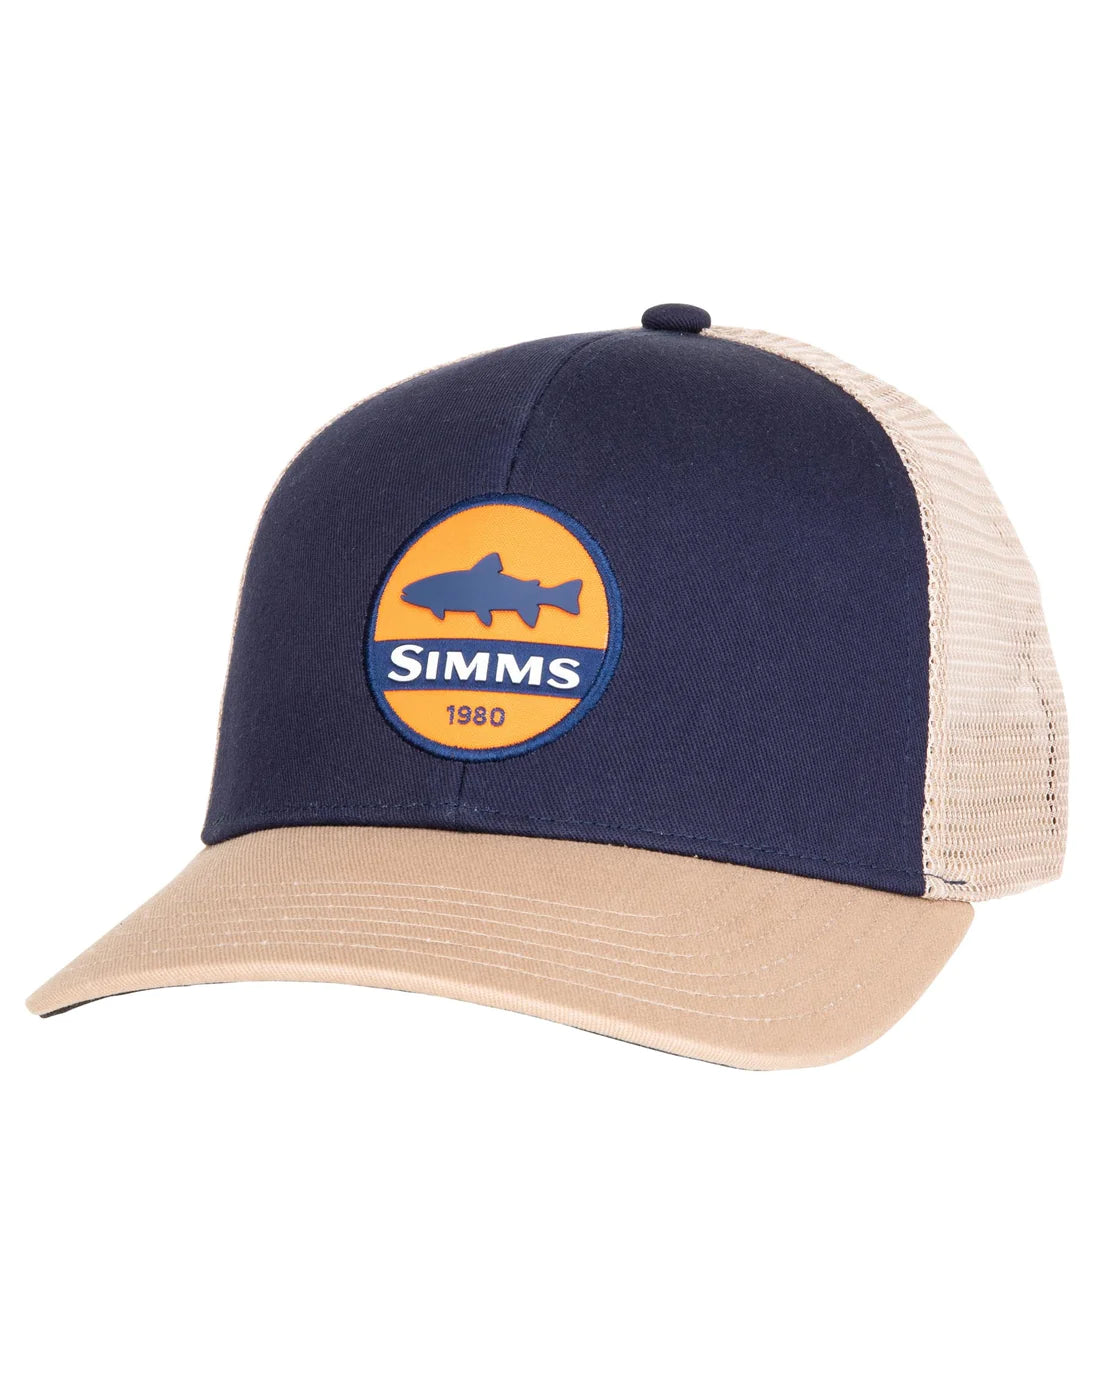 Simms Trout Patch Trucker - OSFM / NAVY - Mansfield Hunting & Fishing - Products to prepare for Corona Virus